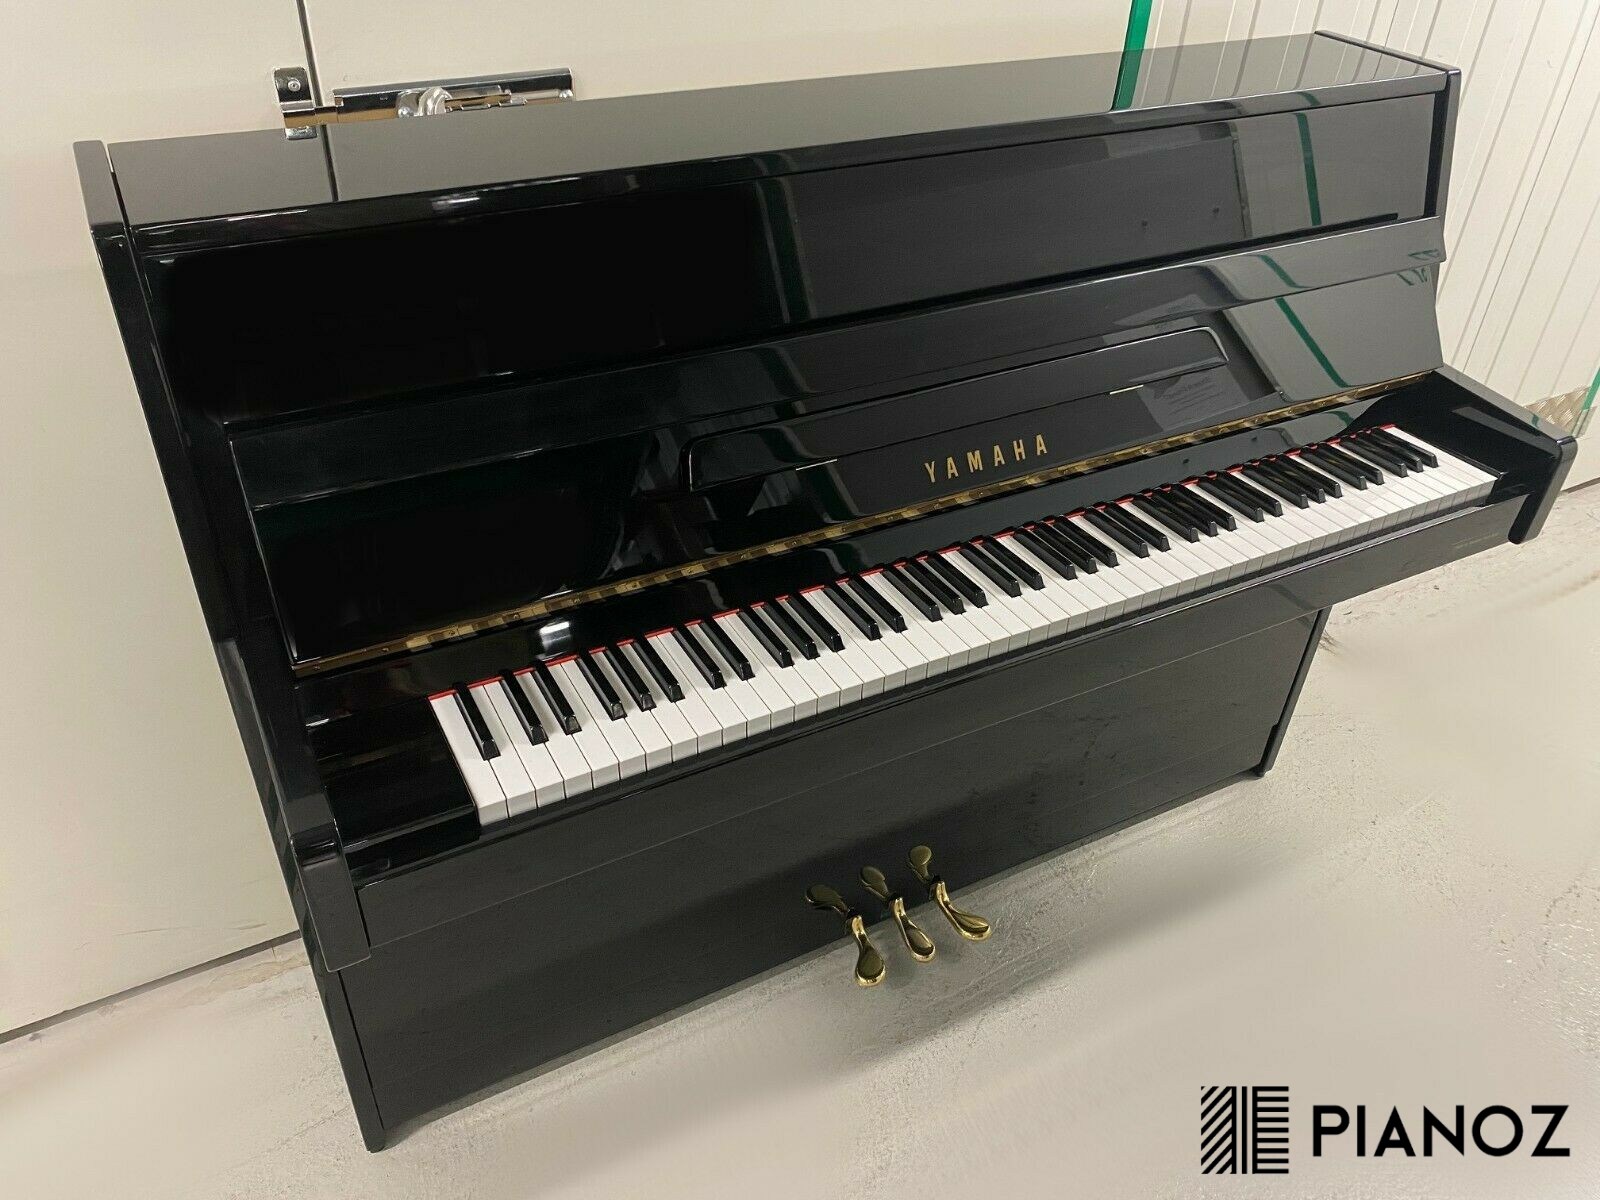 Yamaha C108 Upright Piano piano for sale in UK